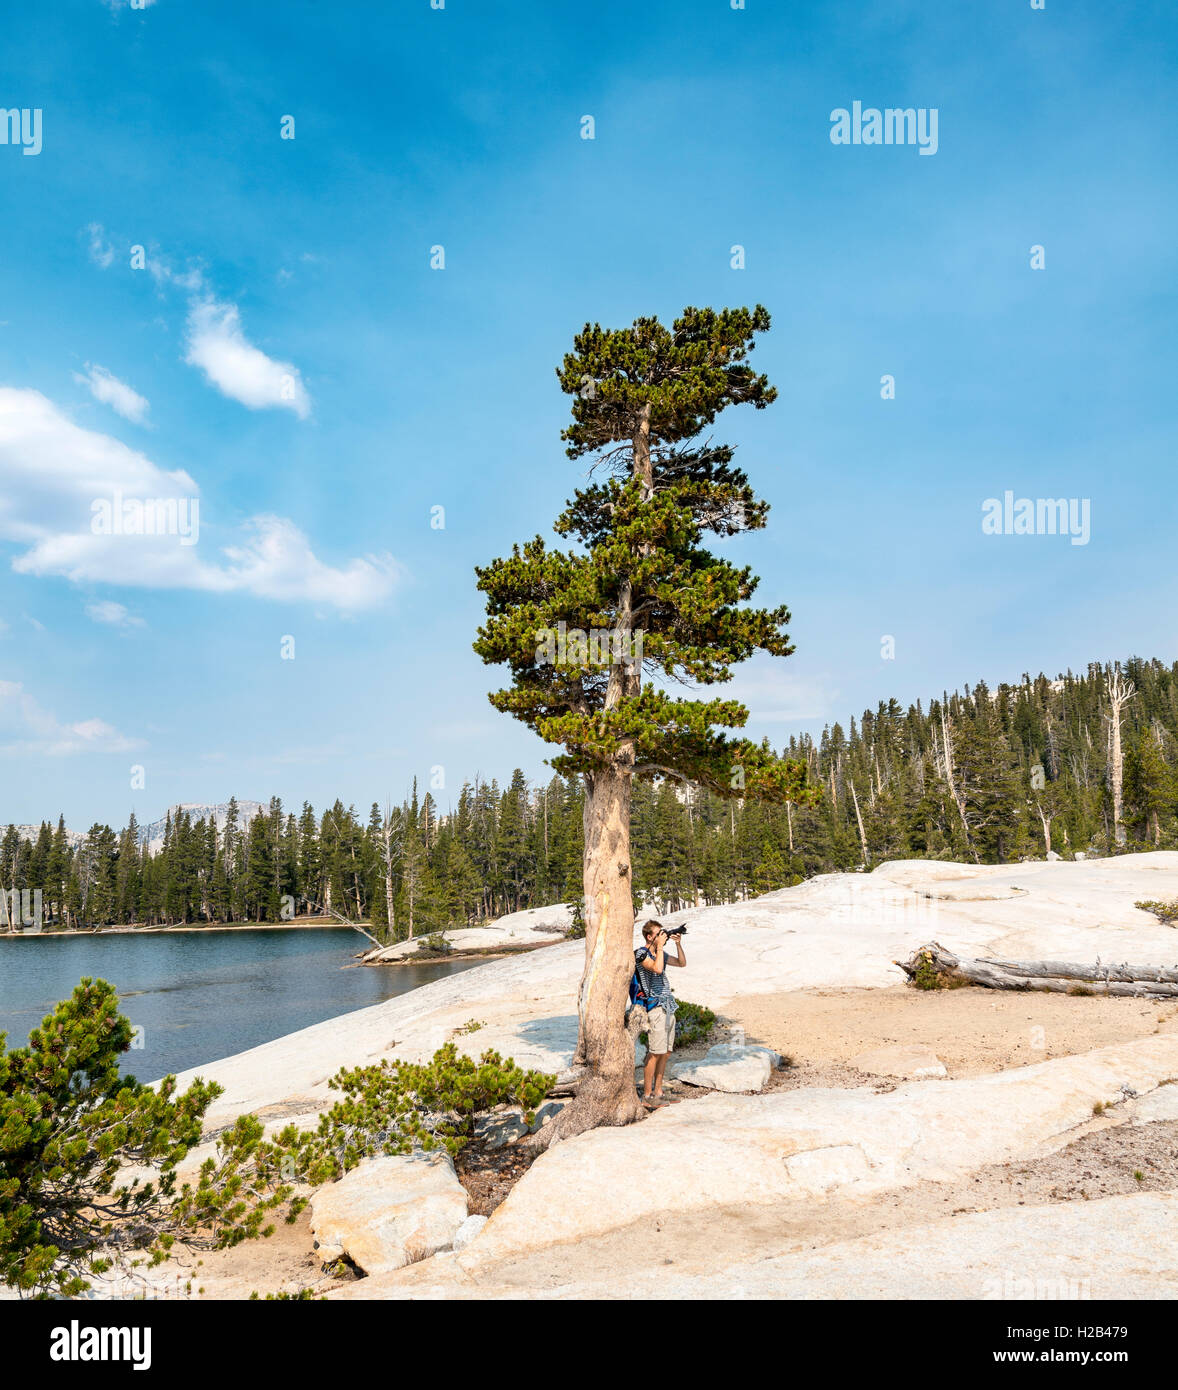 Young man, tourist photographing tree at Lower Cathedral Lake, Sierra Nevada, Yosemite National Park, California, USA Stock Photo